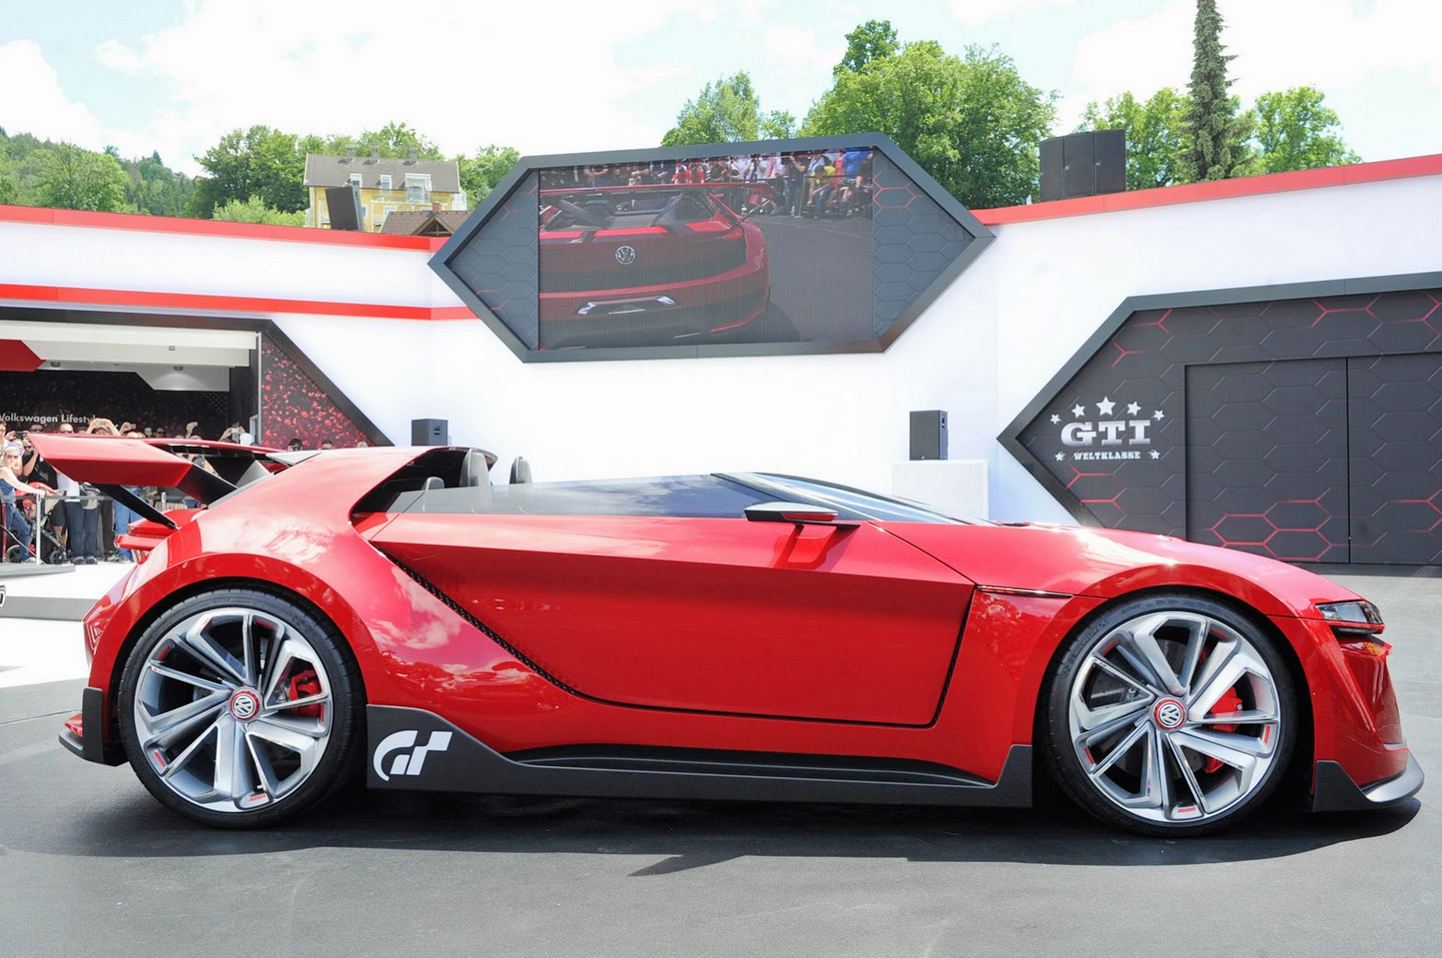 Volkswagen GTI Roadster concept at Worthersee